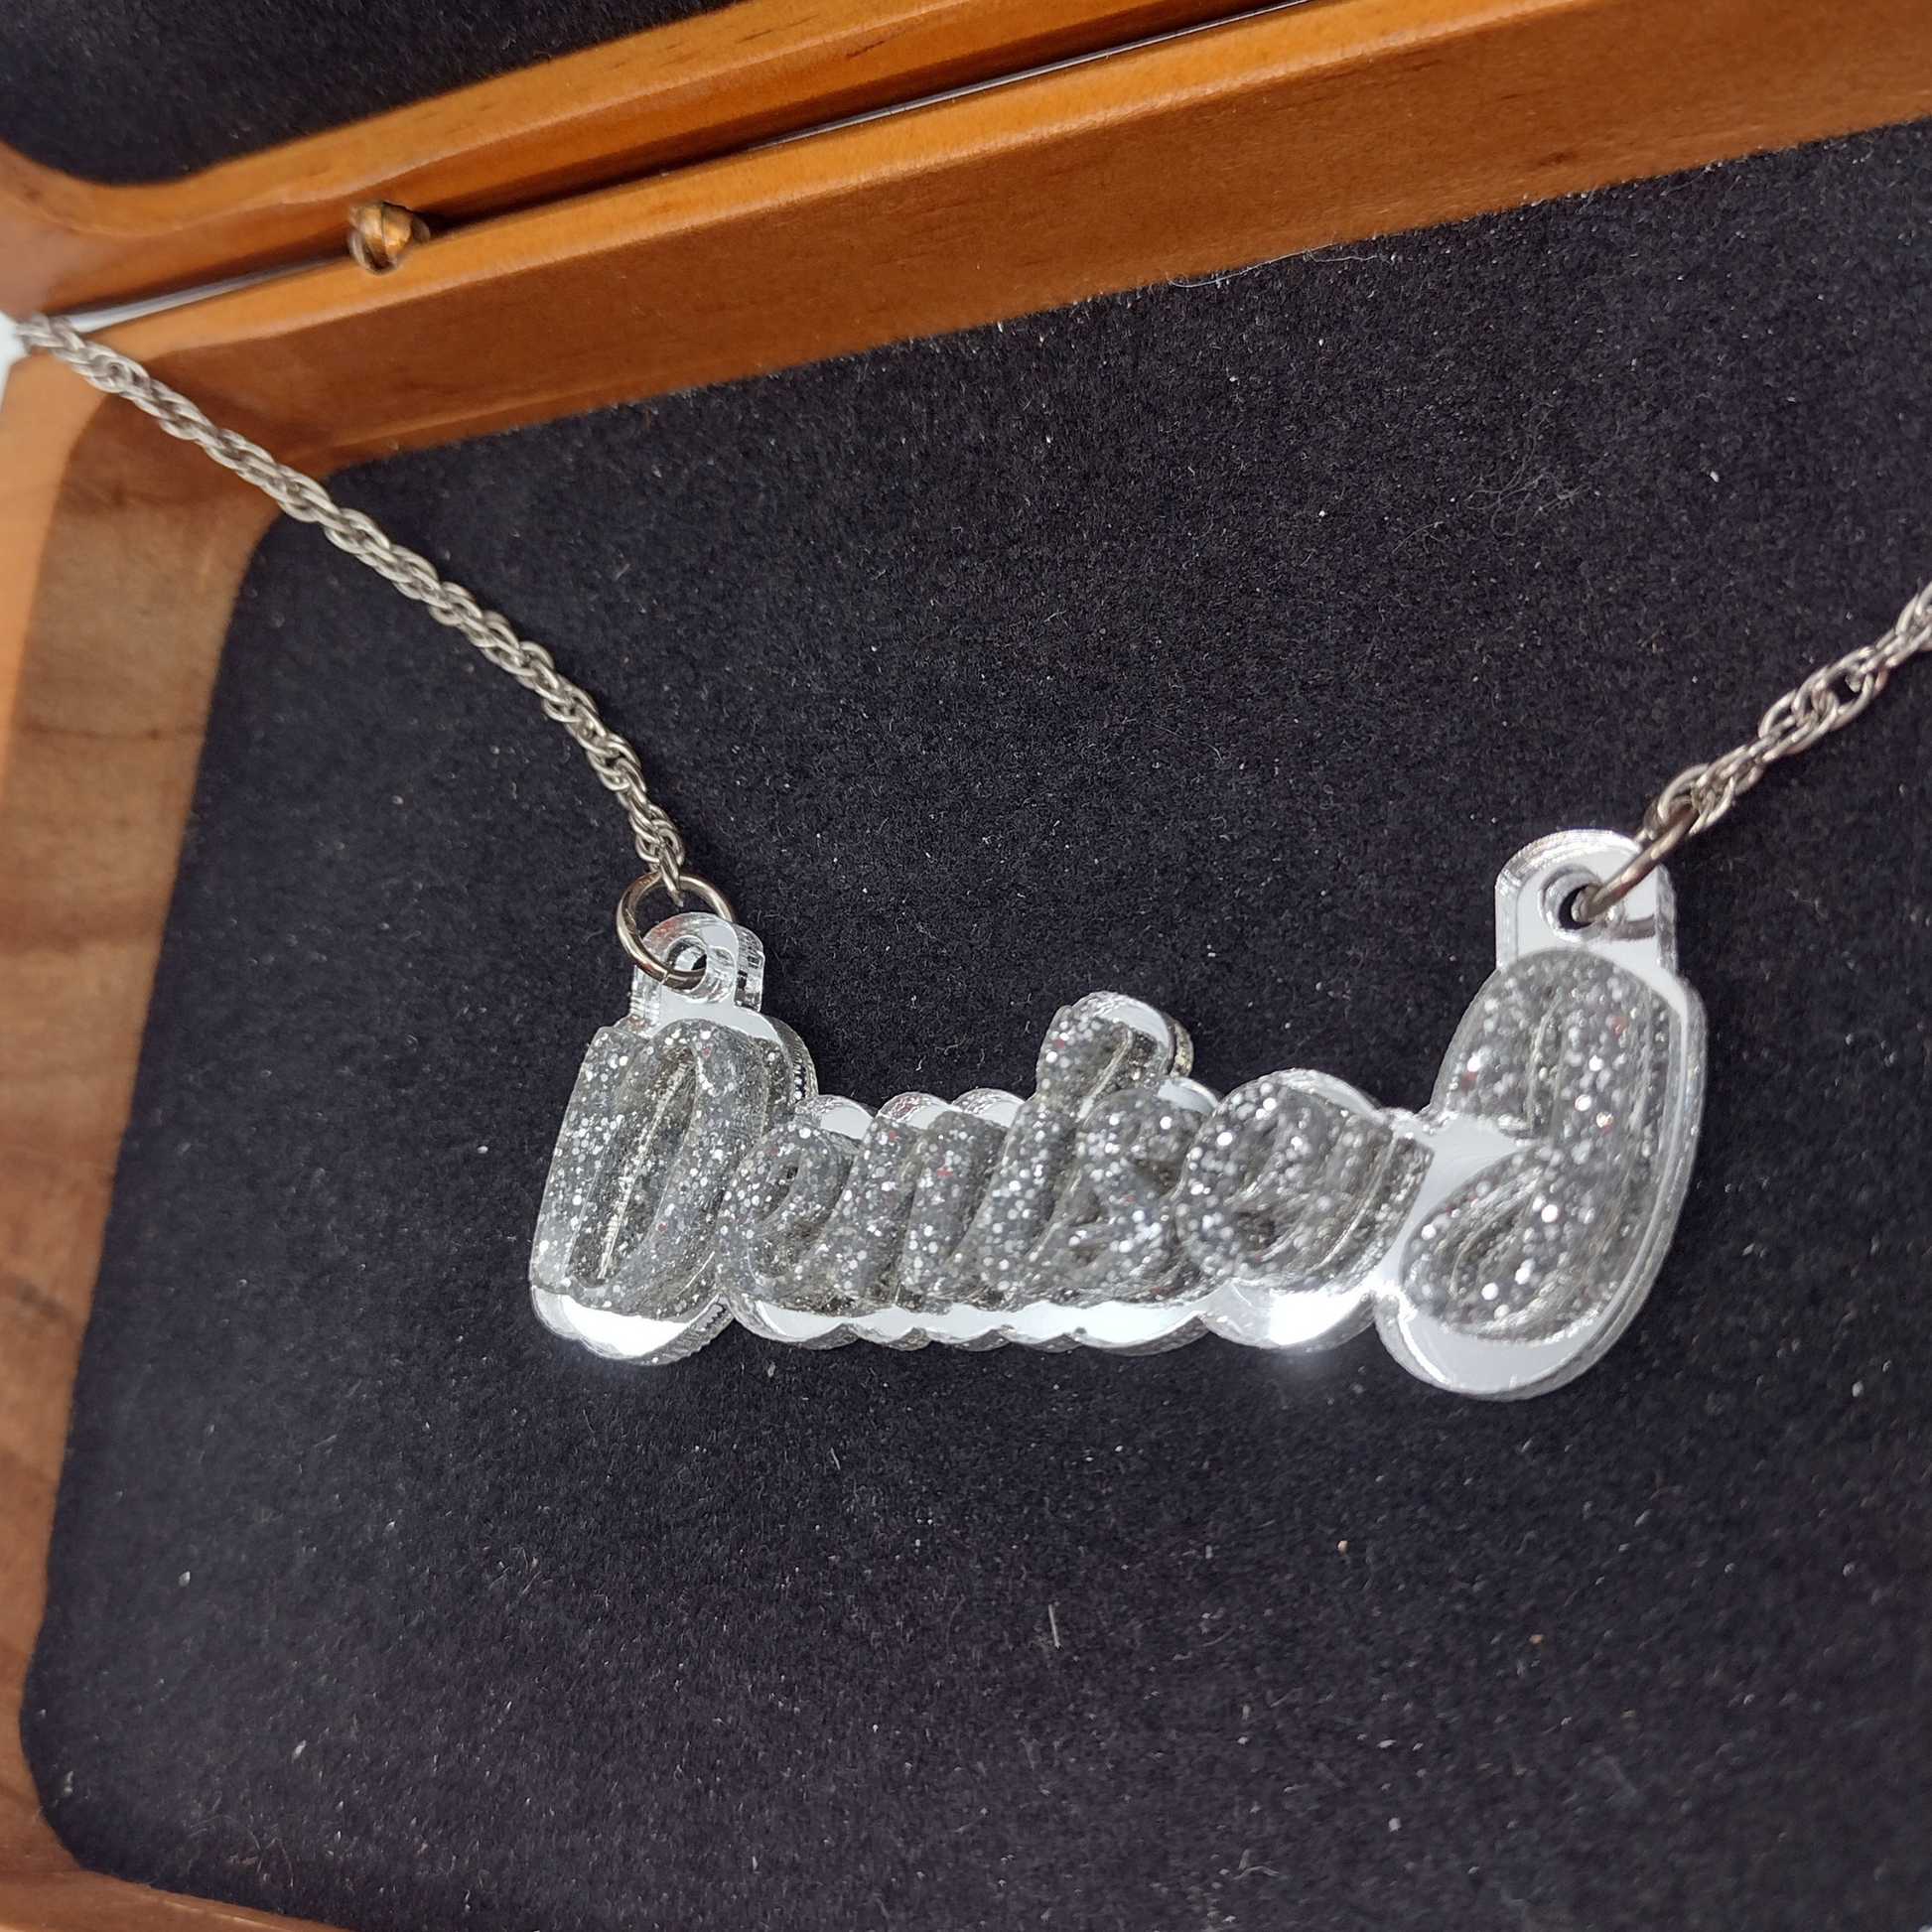 Name Necklace Plate Personalized Custom Silver Nameplate Jewelry Laser Cut Diamond Look Glitter Script Cursive Letters, Quality Silver Chain